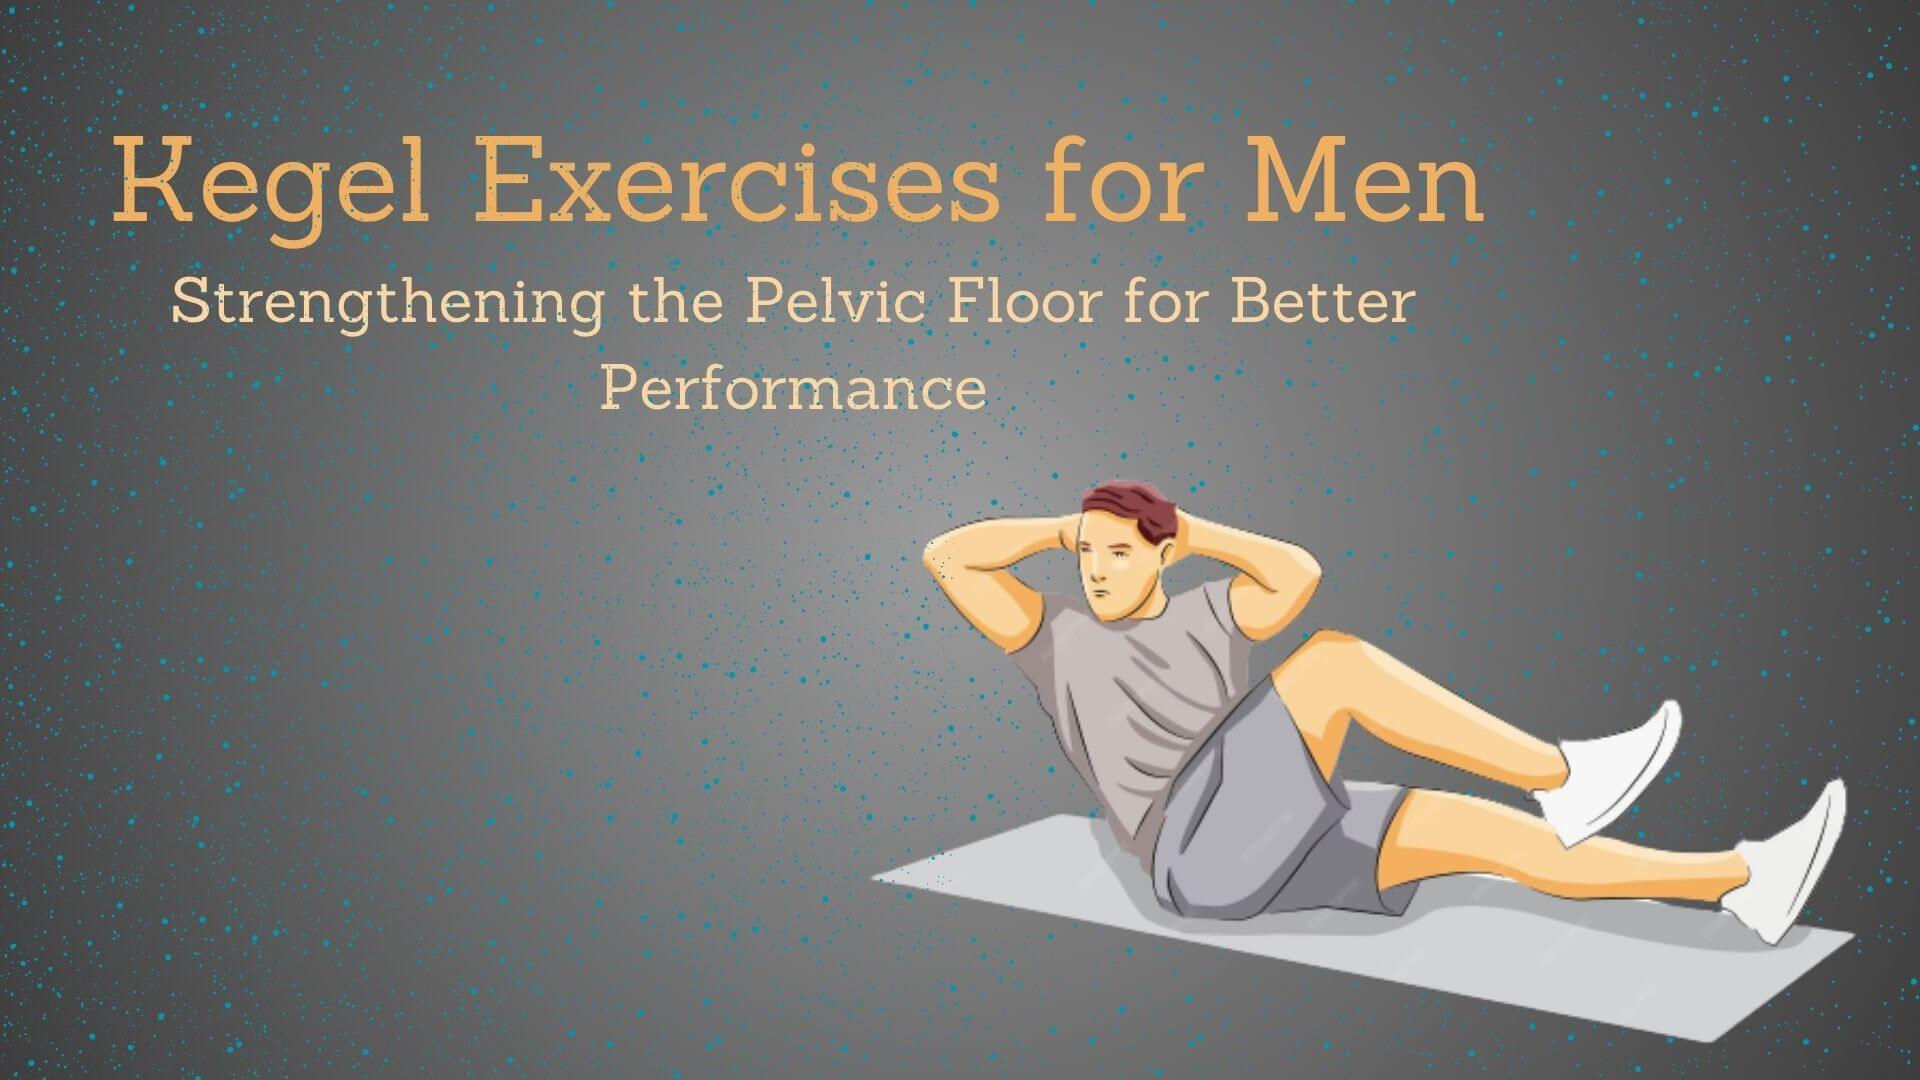 Kegels for Men Video - Physical Therapy Beginners Guide - 3 Easy